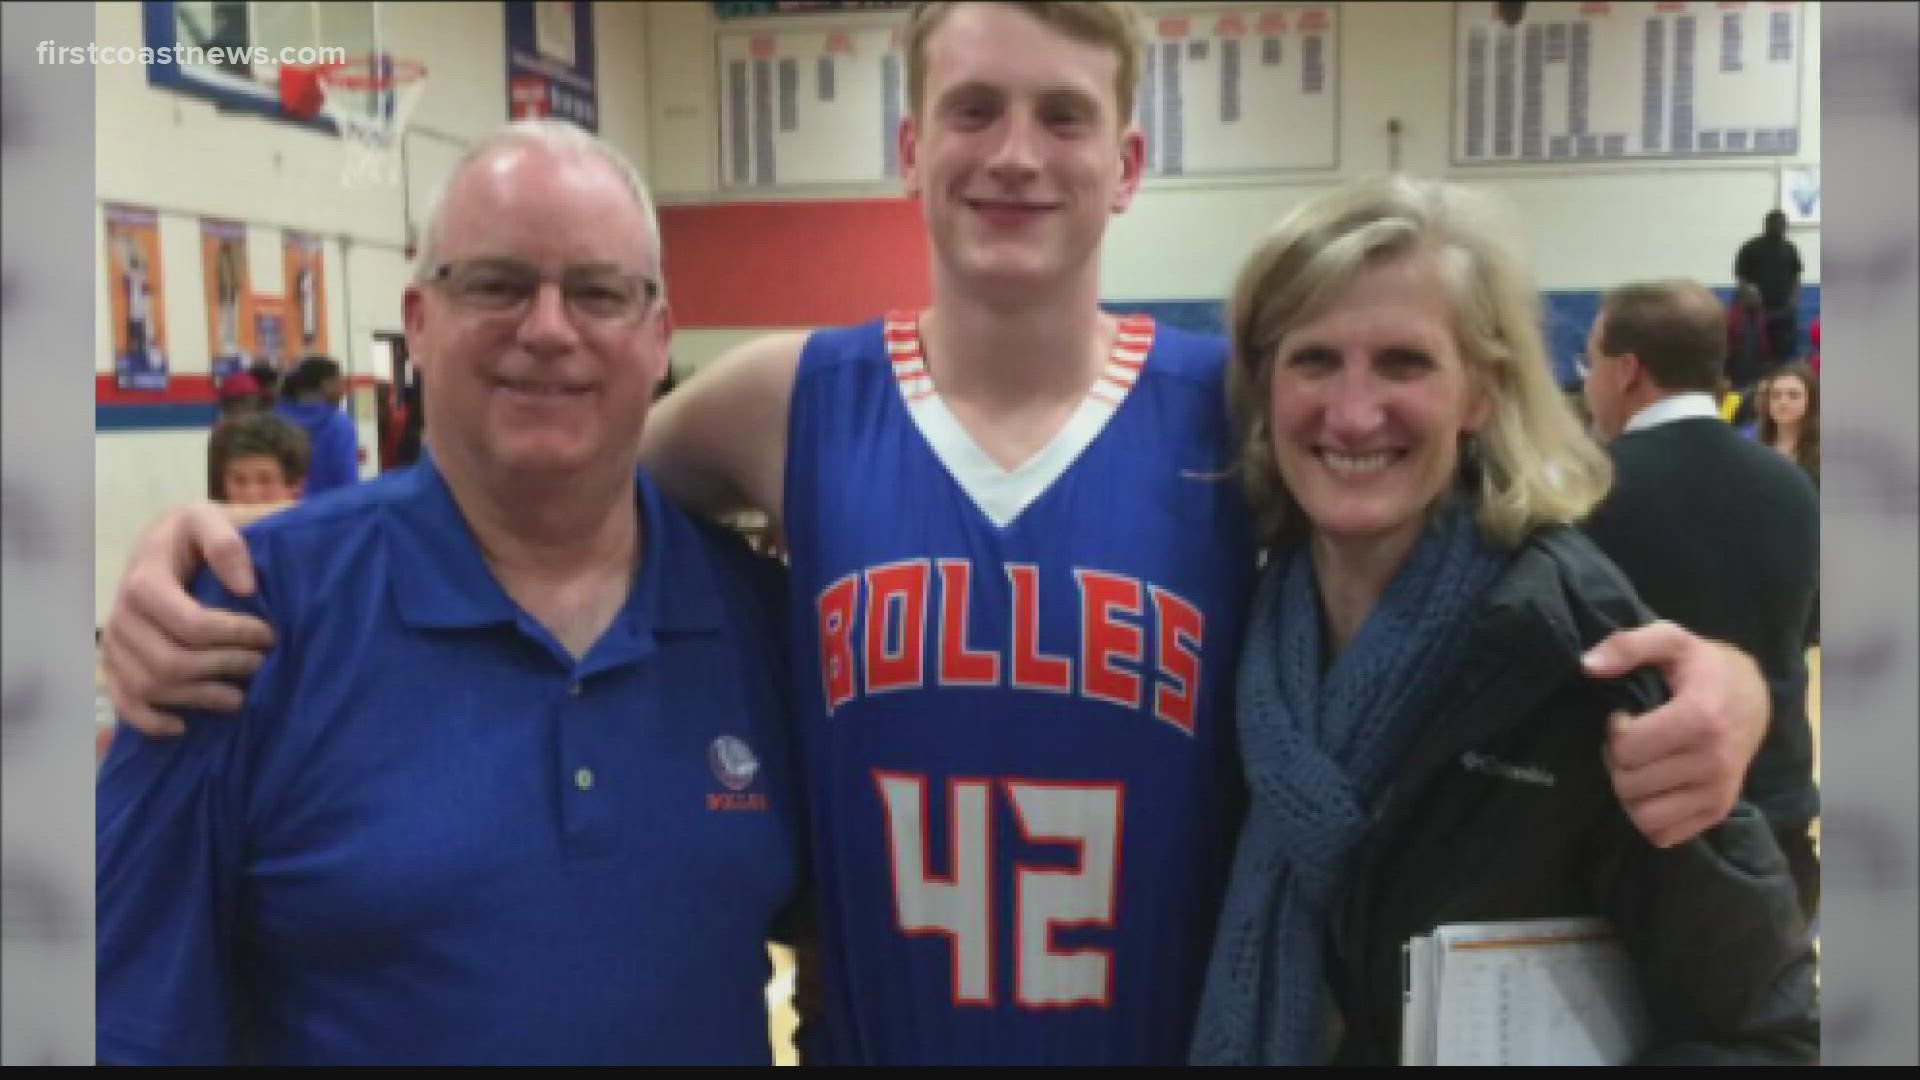 When Patrick Heinold took his own life, his parents say no one saw it coming. Now they're inviting everyone to a basketball/volleyball tourney to raise awareness.